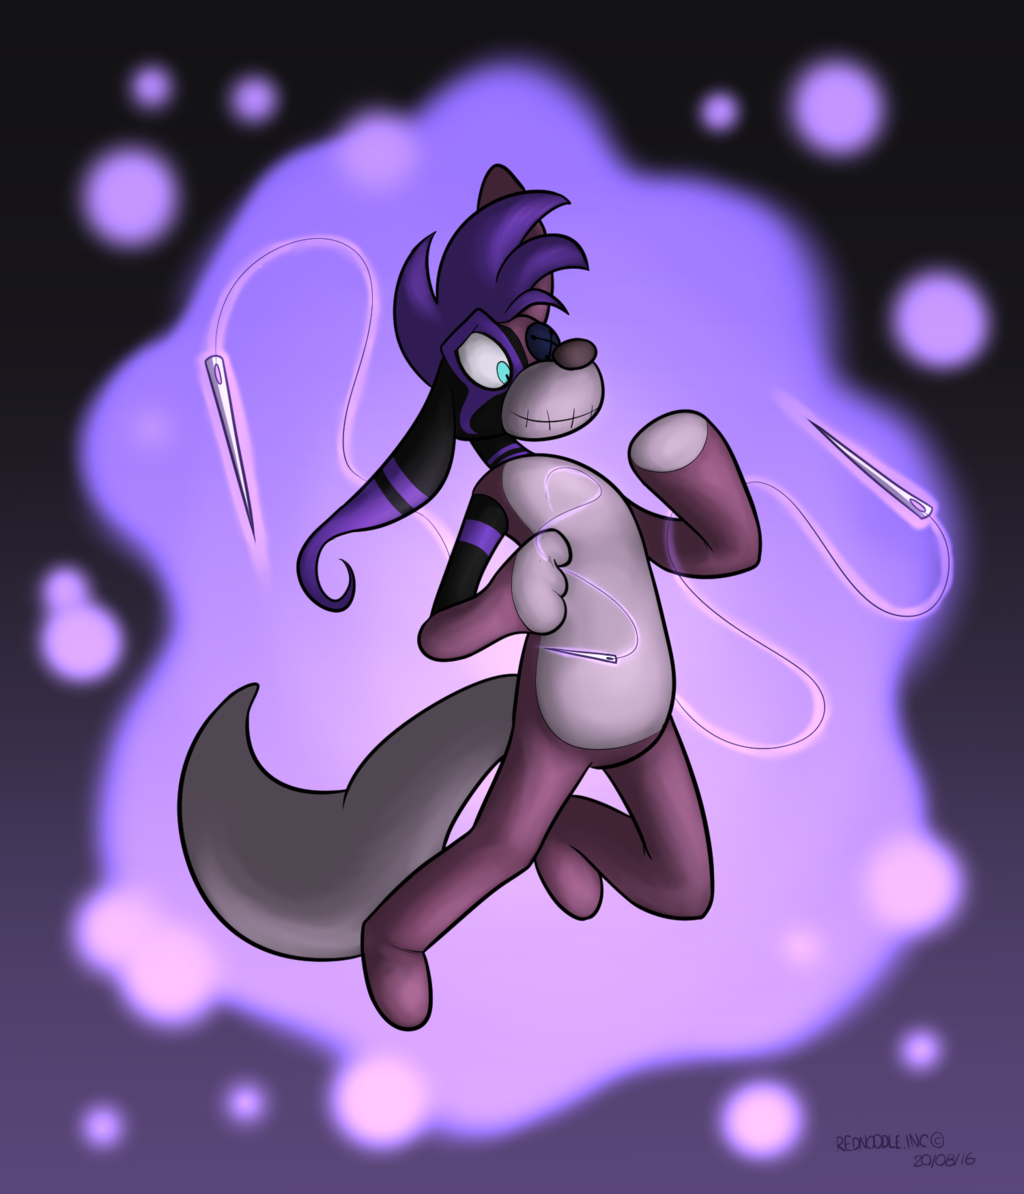 [COM] Never Play With Needles